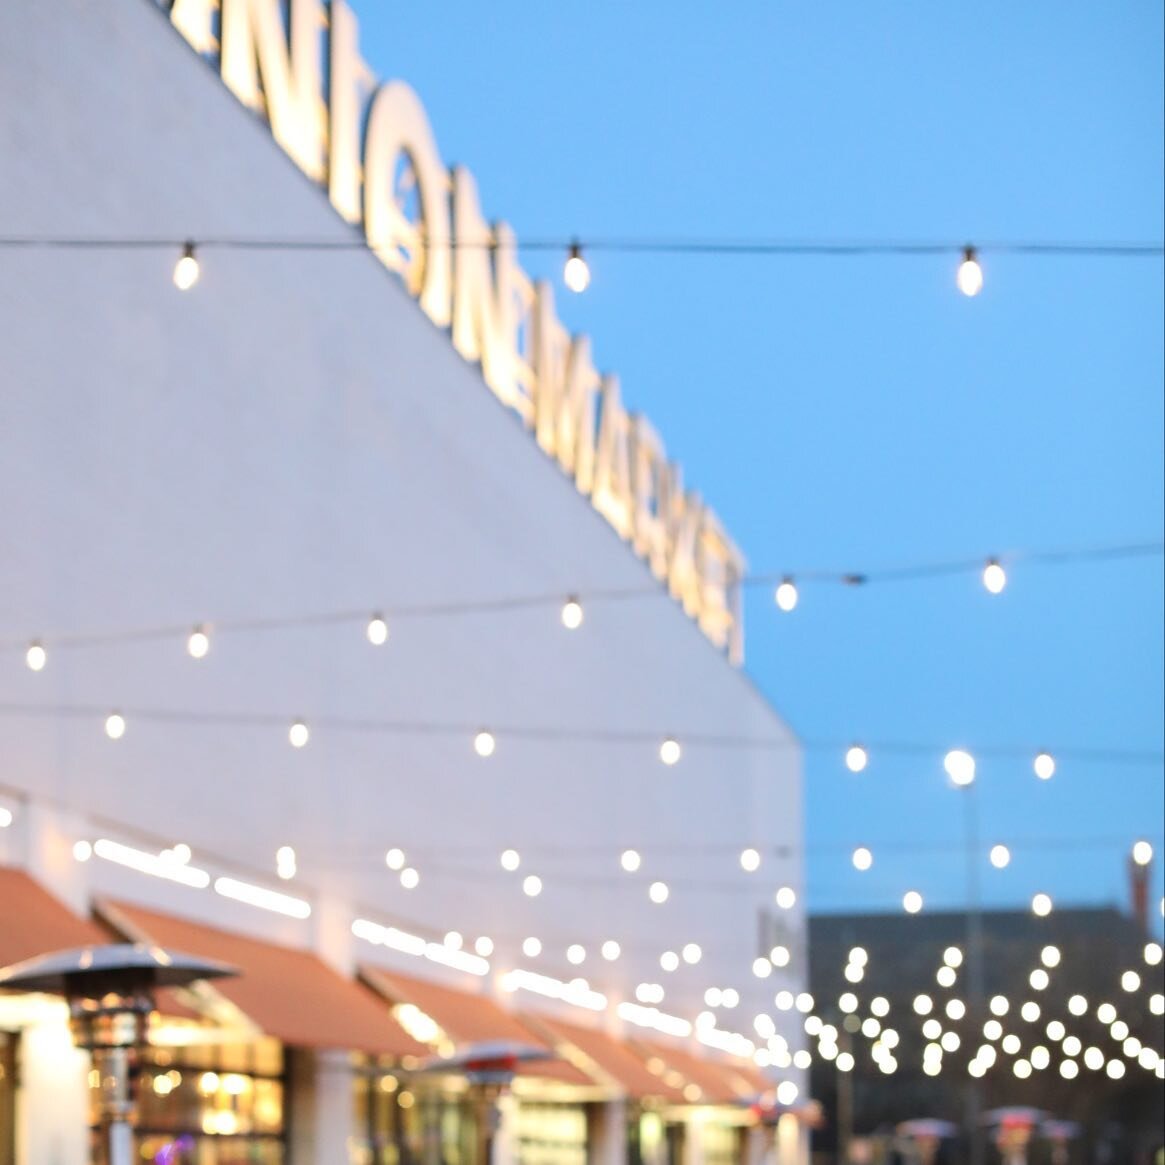 The perfect weather for an evening at the market! @unionmarketdc